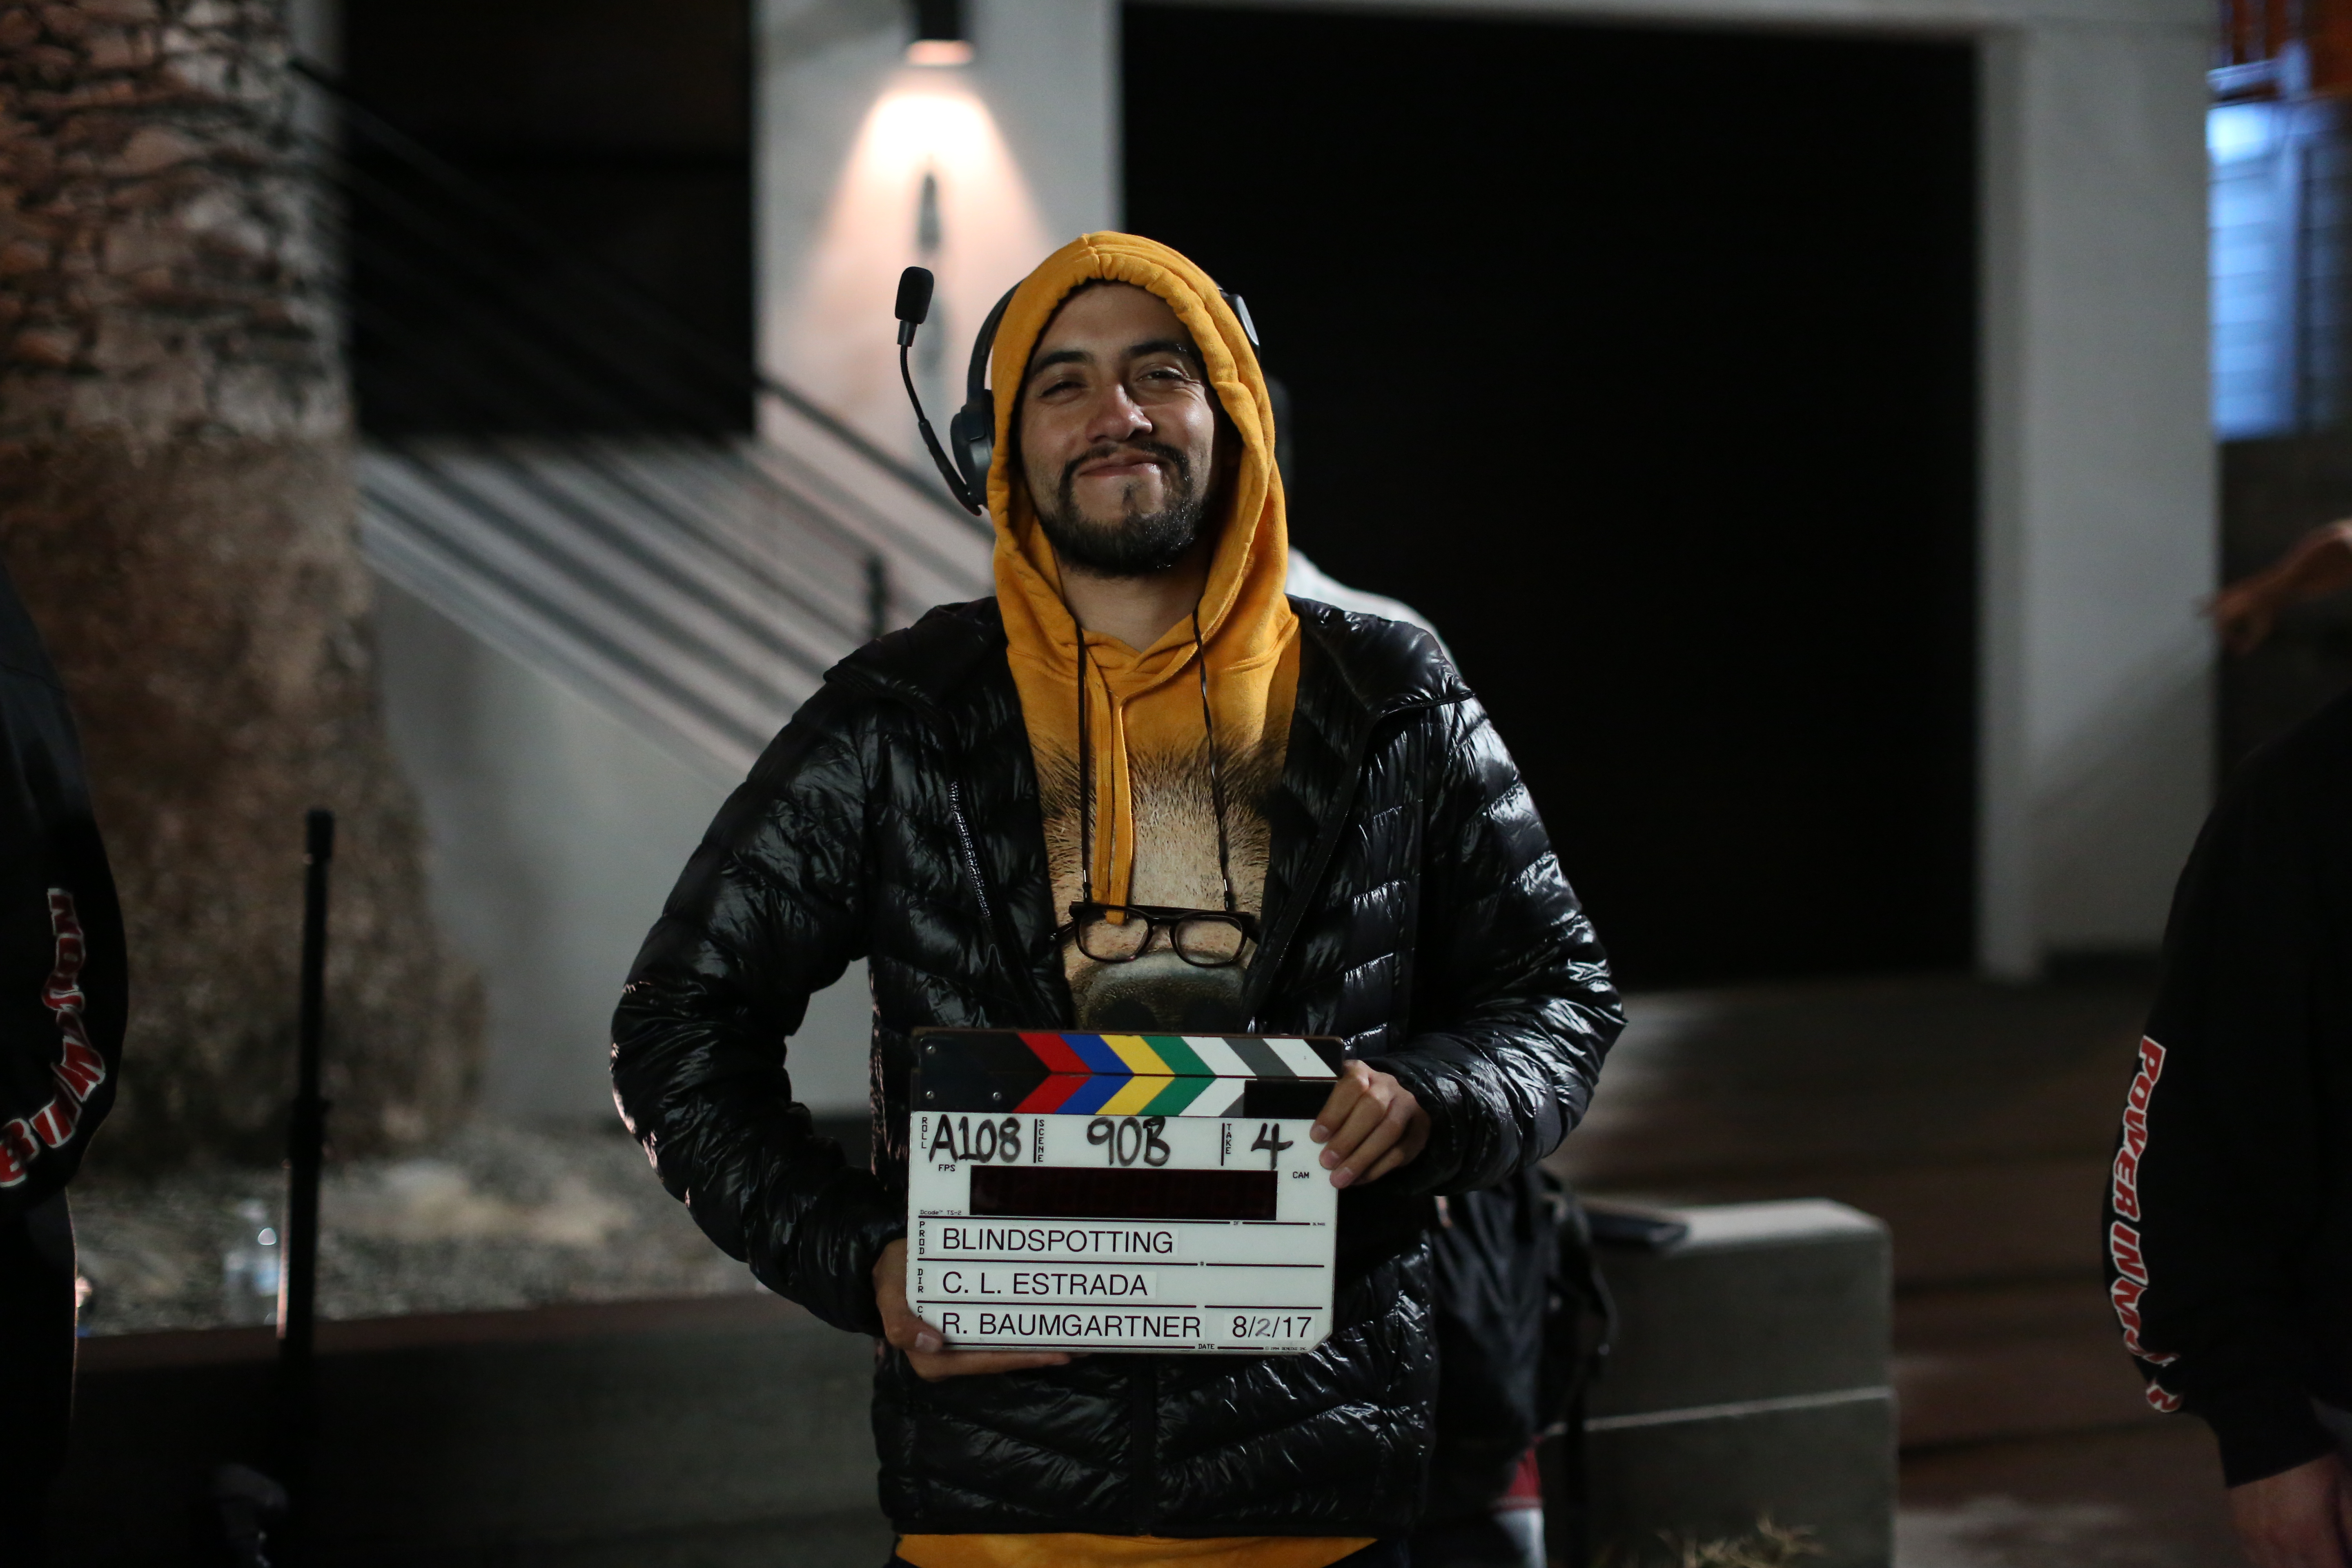 Carlos on set holding a clapperboard and looking at the camera.